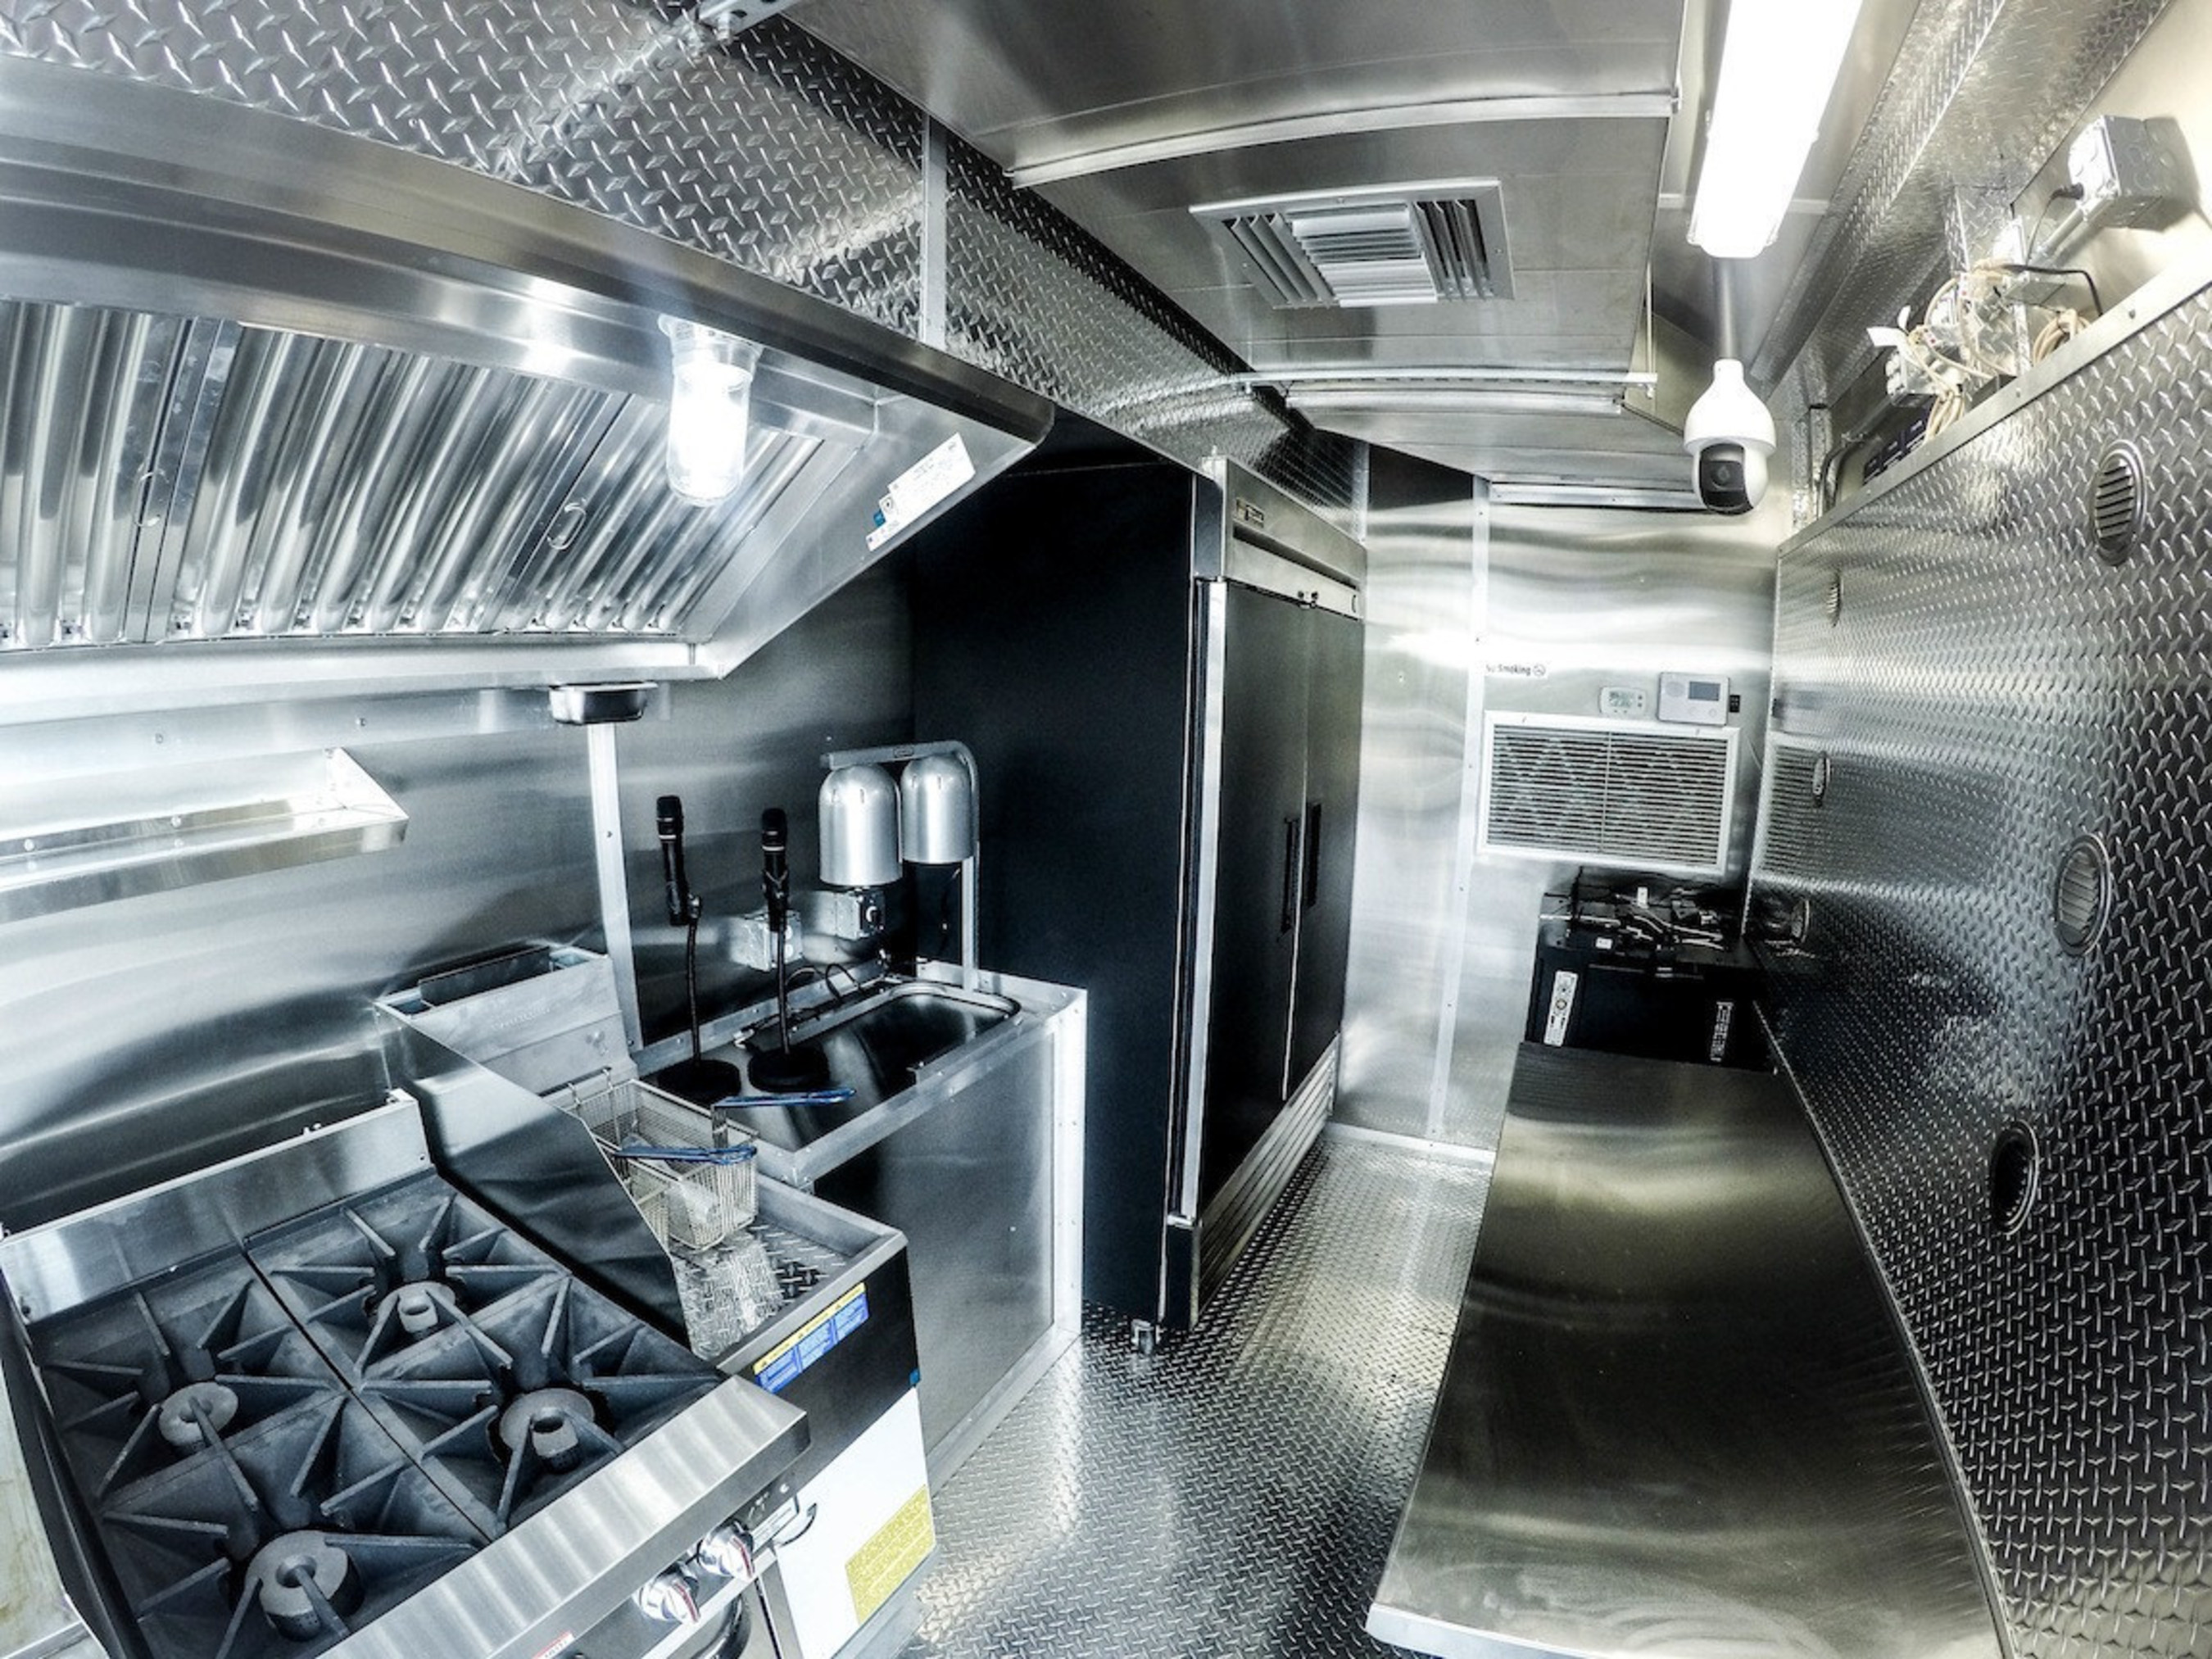 The most up-to-date professional culinary equipment for the dual competition kitchens is housed on the main T.R.U.C.K! platform.